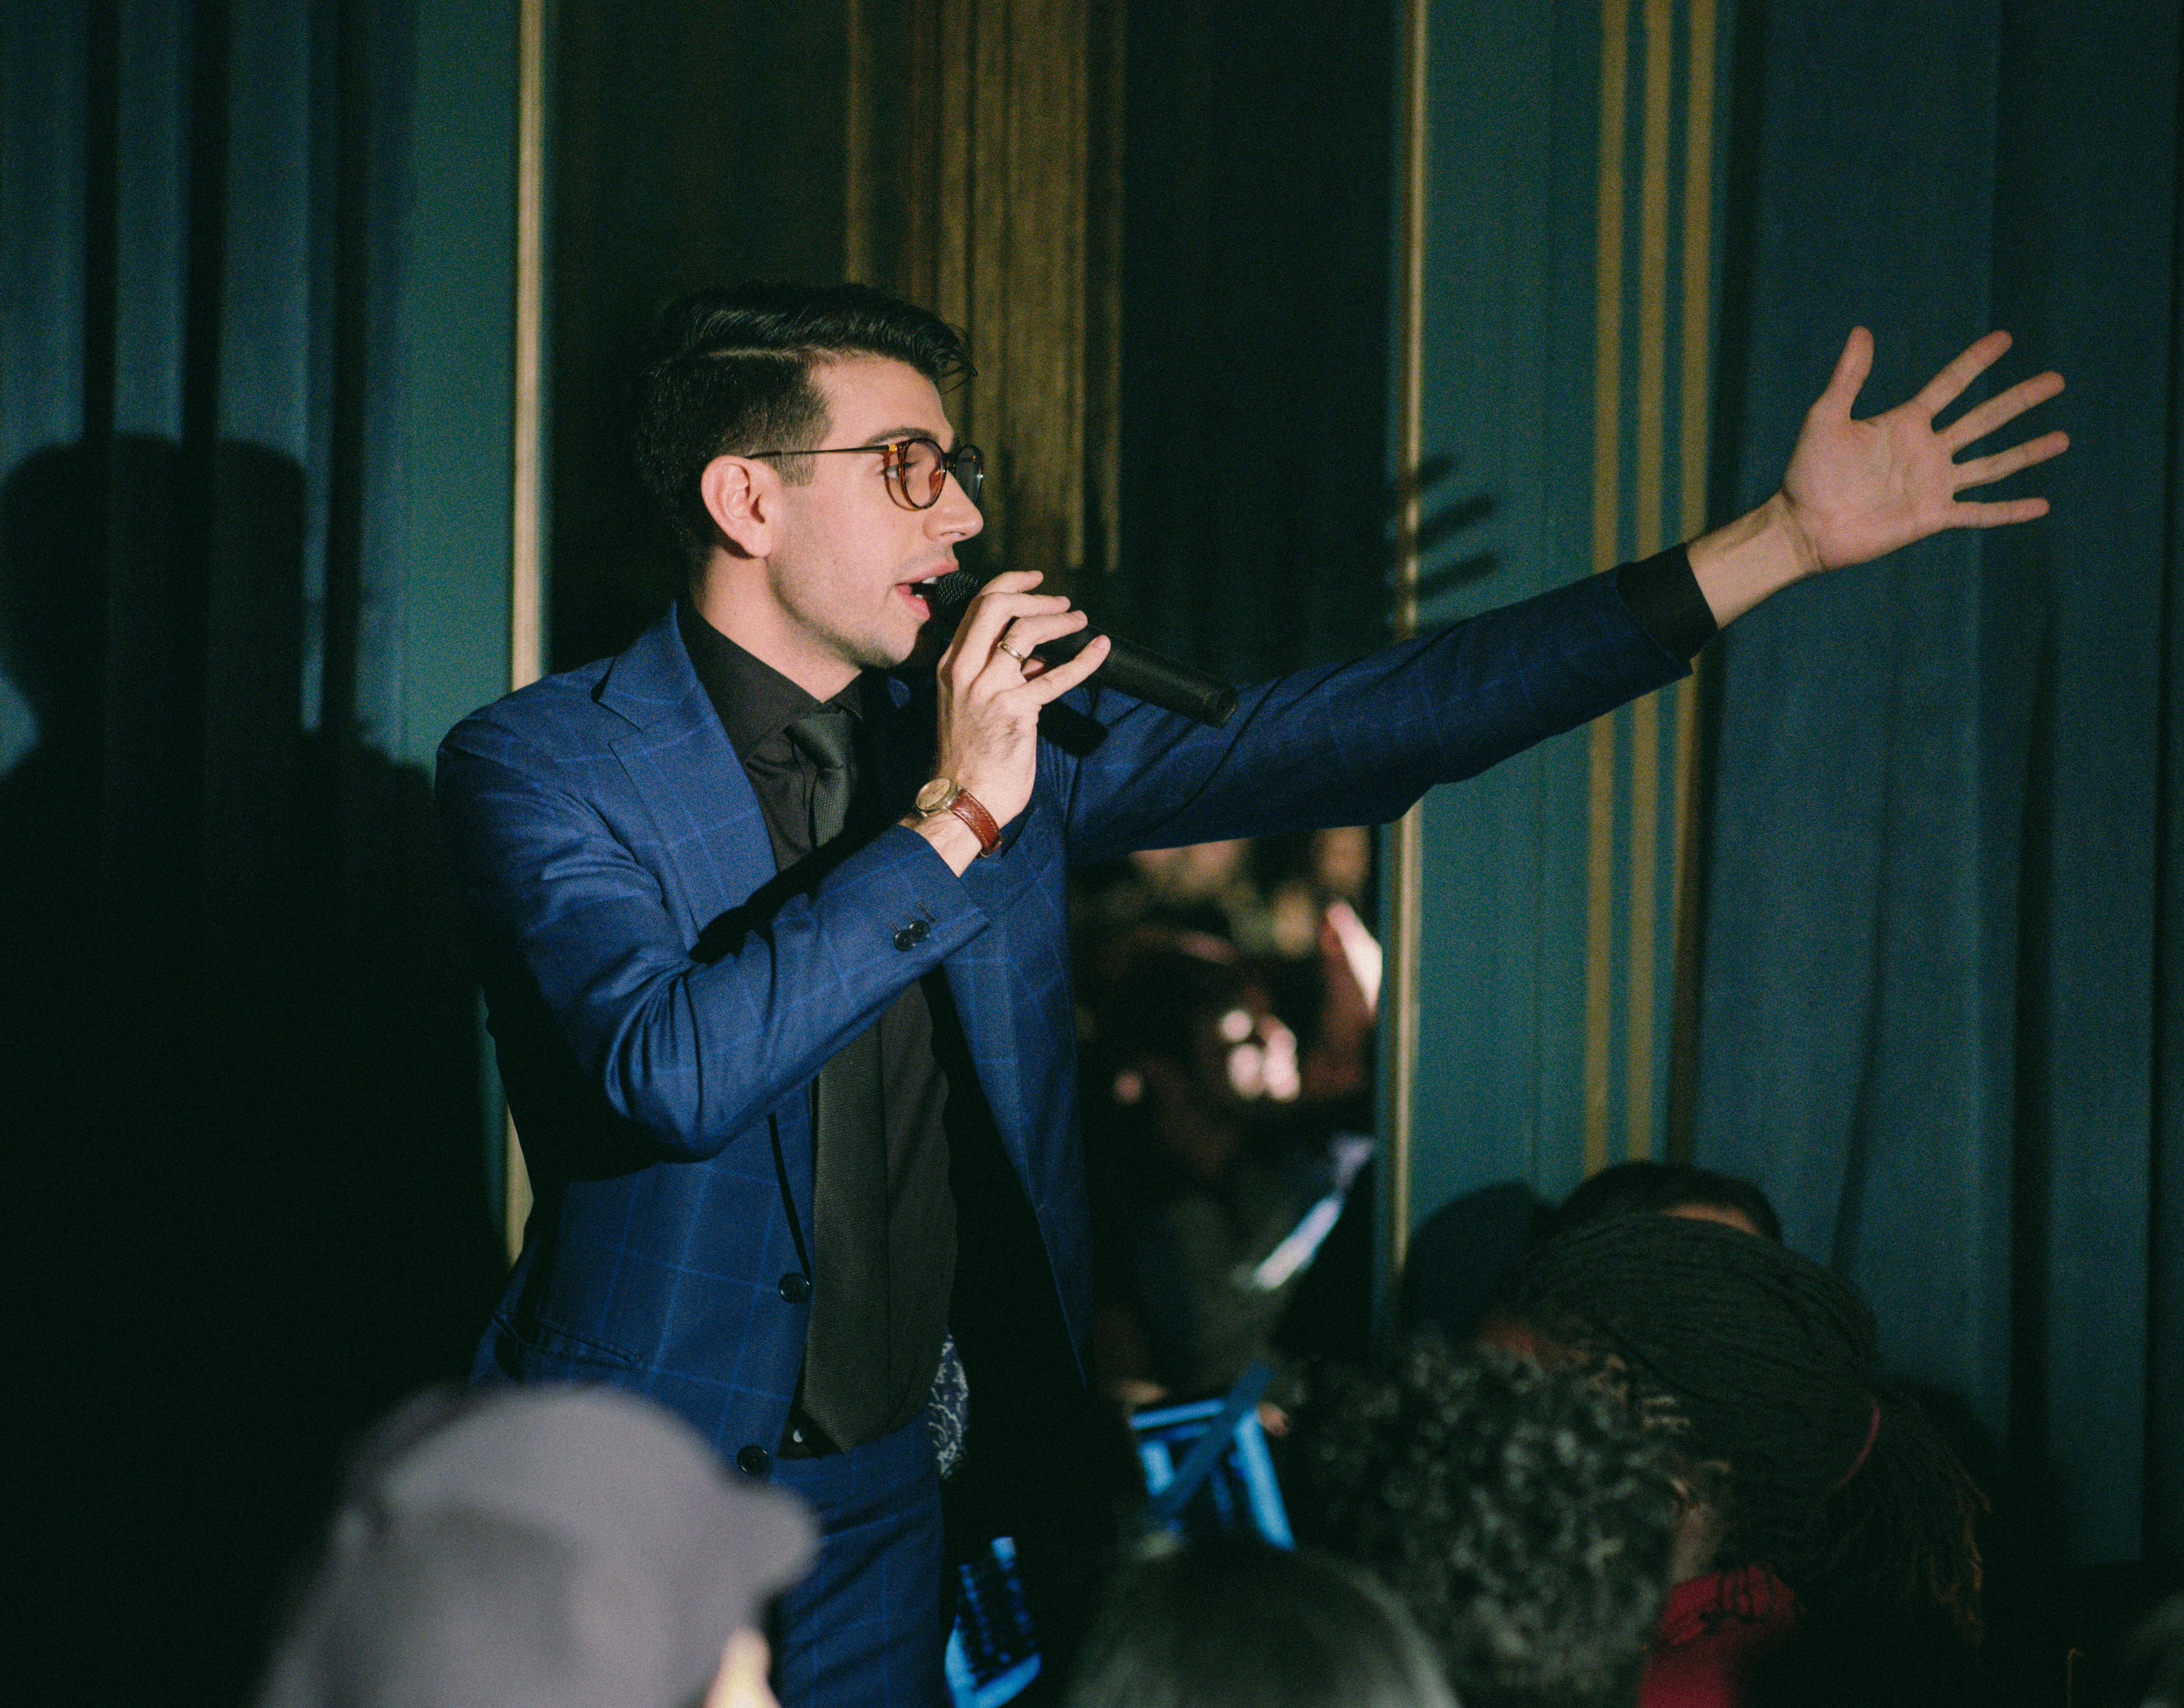 A person in a blue suit speaks into a microphone, gesturing with their right hand, in front of a dark curtain.